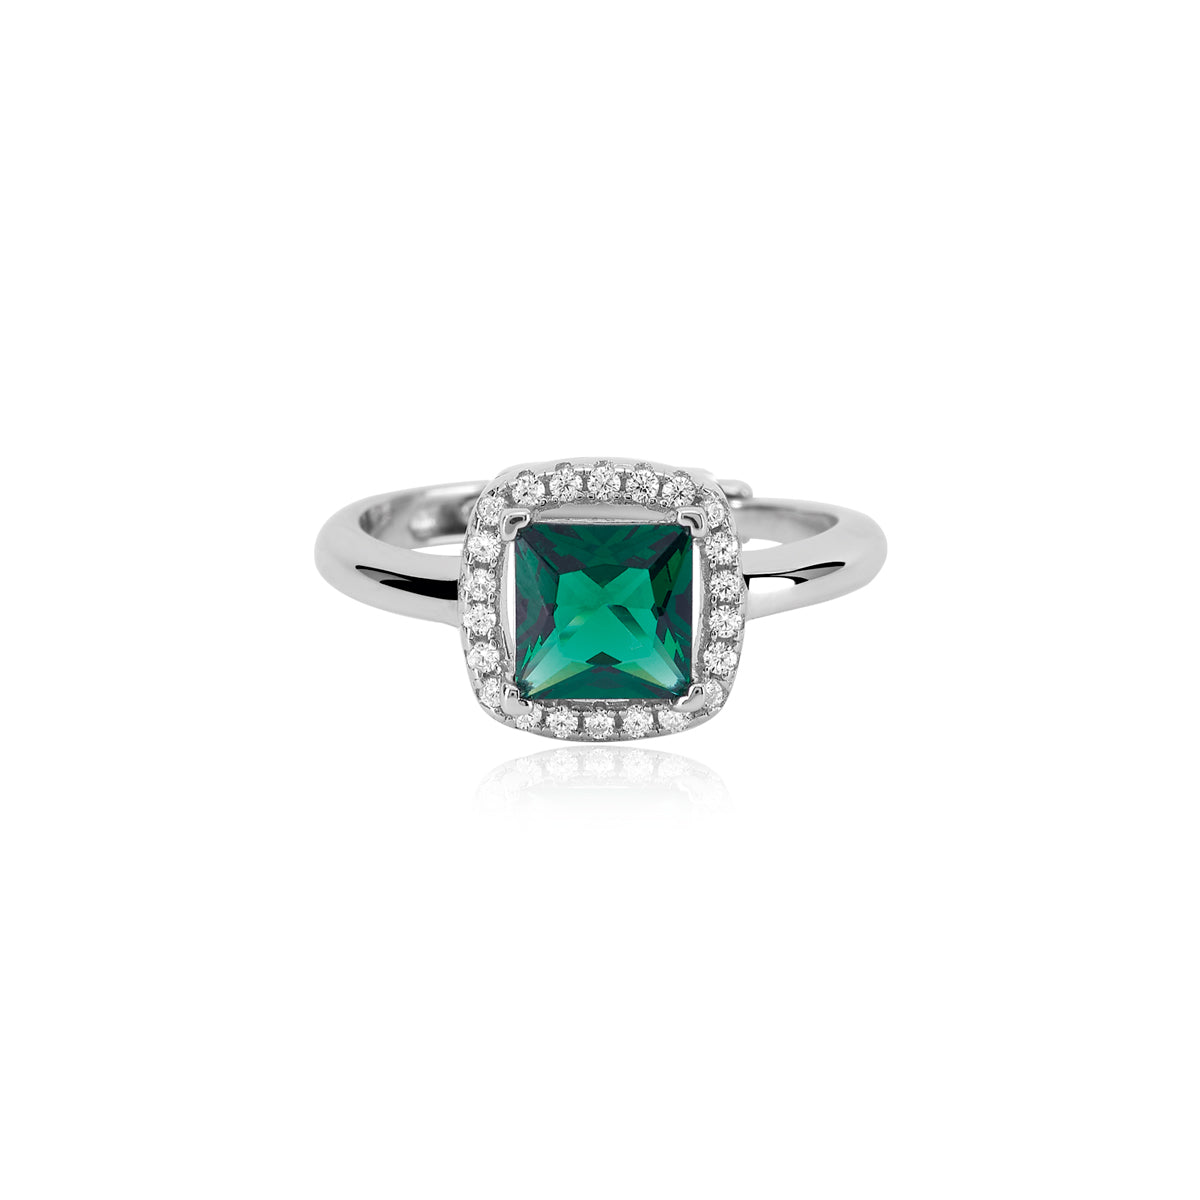 MABINA - Silver Ring with Emerald